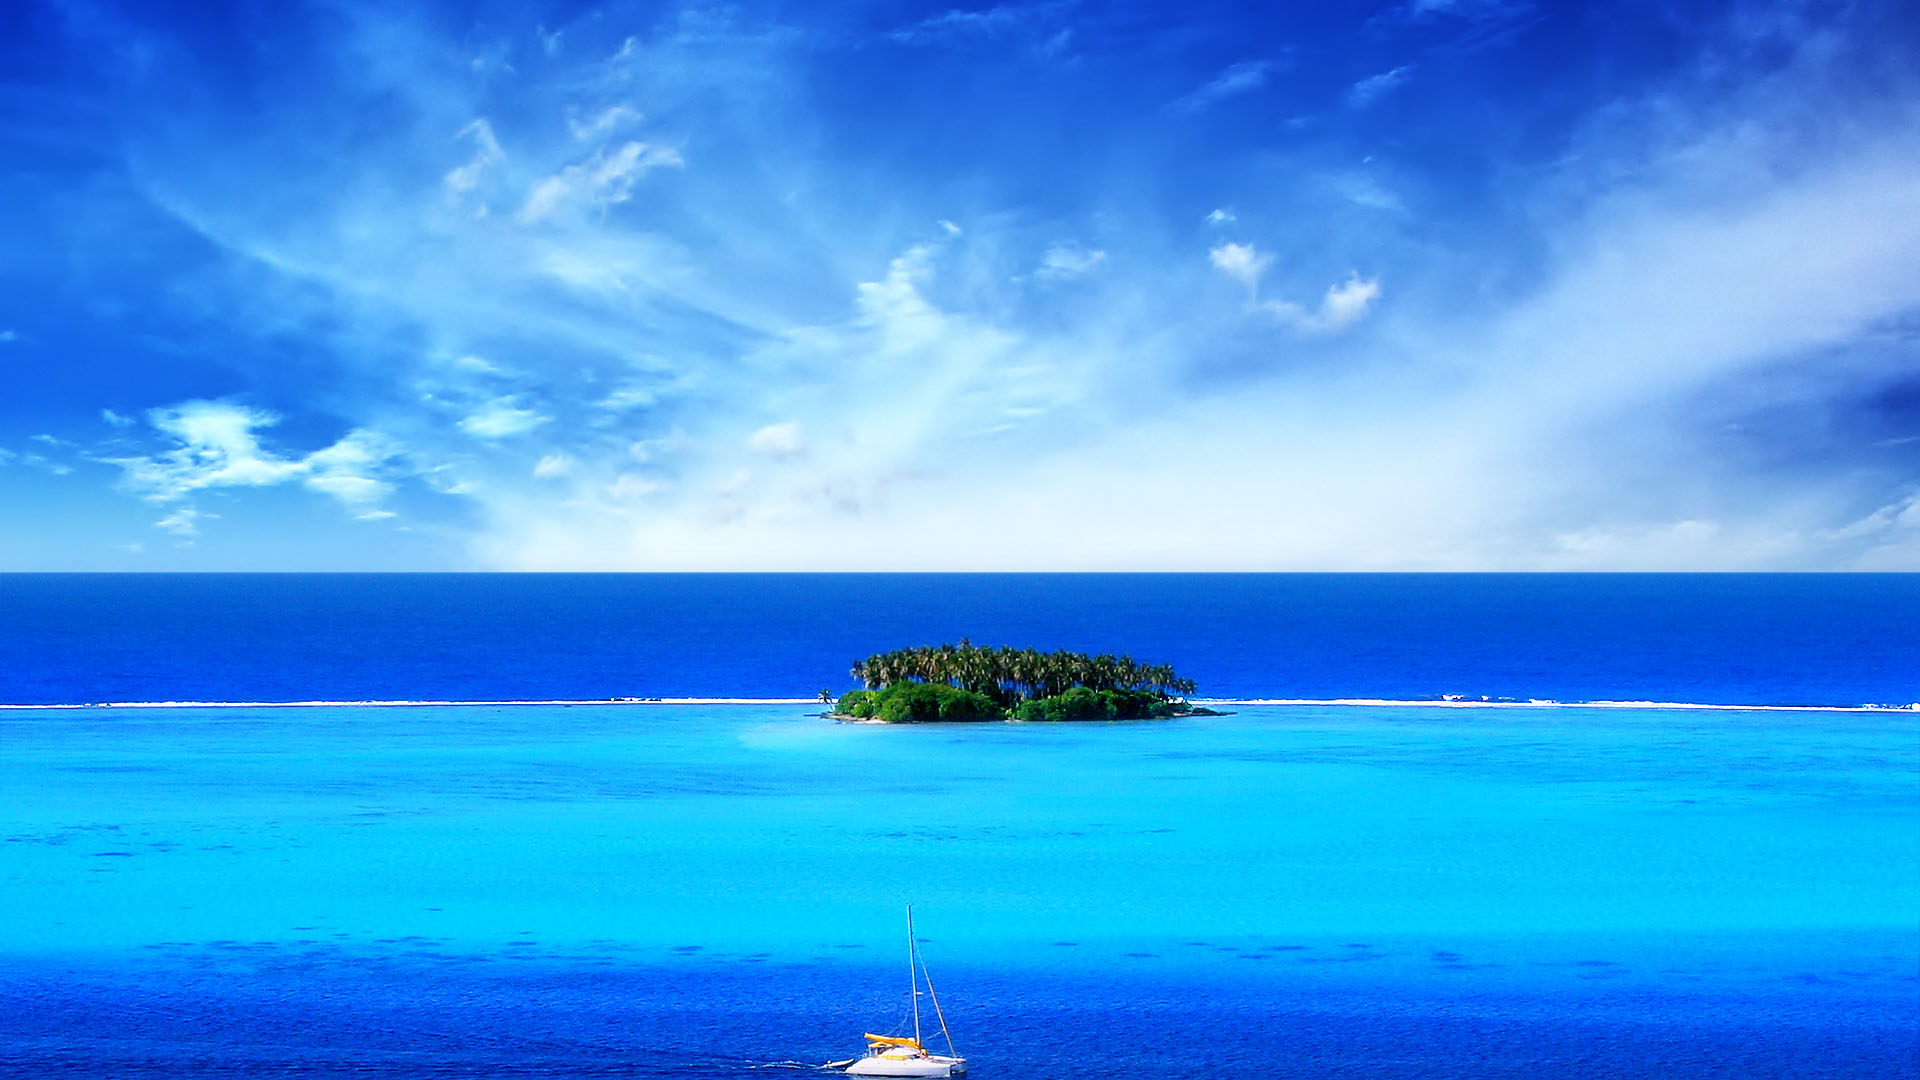 hd tropical island beach paradise wallpapers and backgrounds 1920x1080